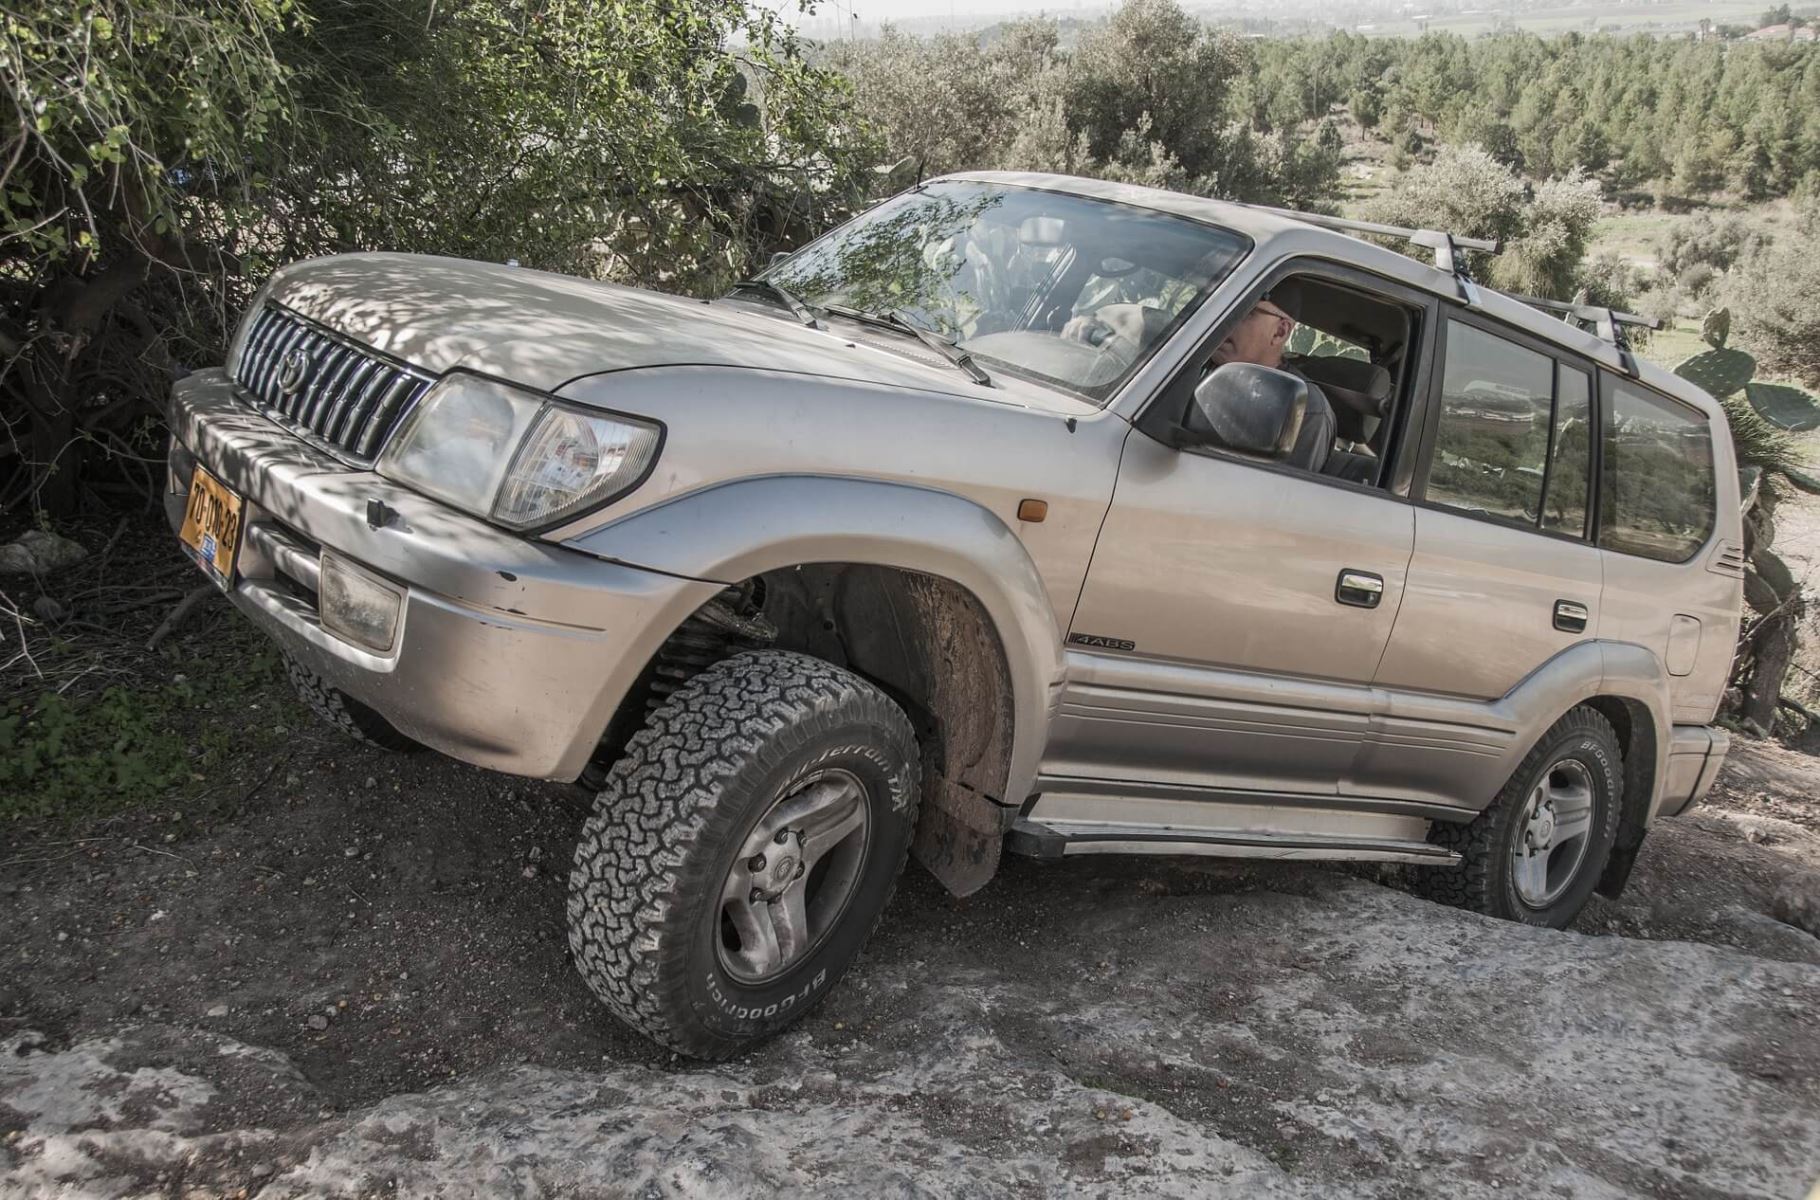 The Best Car Suspension Tips For a Safe, Comfortable Ride